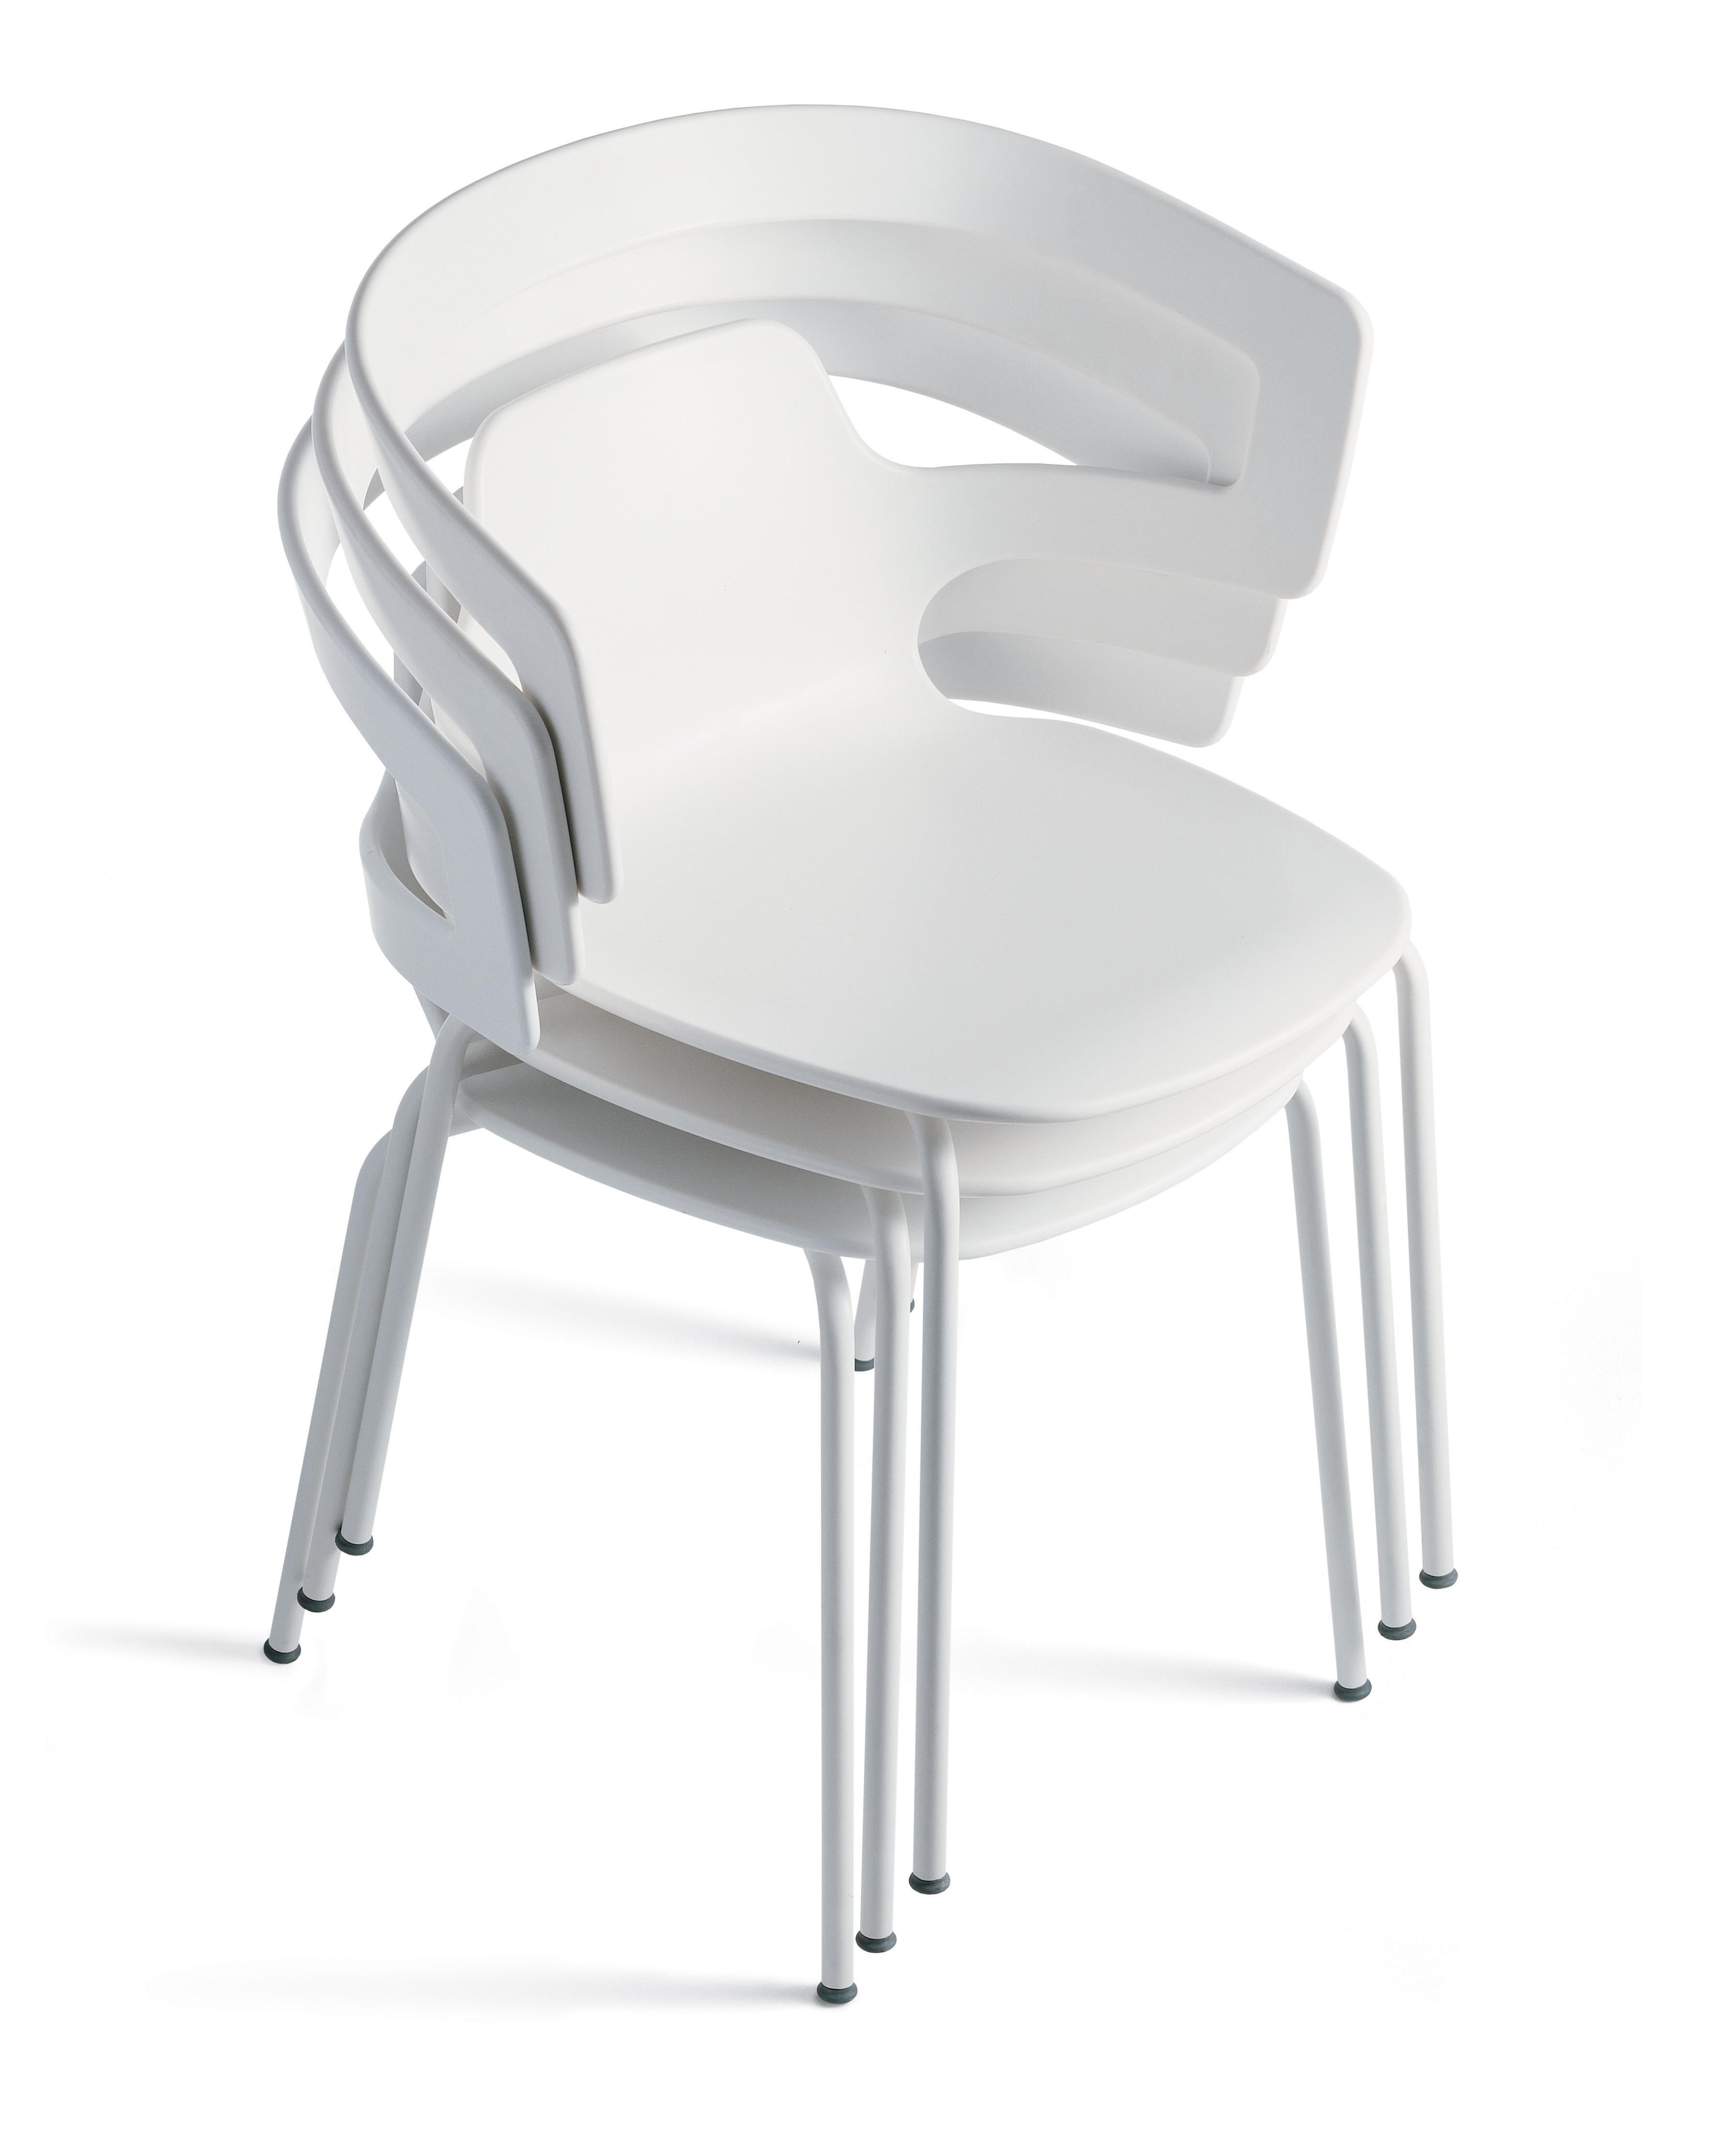 Alias 500 Segesta Chair in White Lacquered Steel Frame by Alfredo Häberli

Stacking chair with arms with structure in lacquered or chromed steel; seat and back in solid plastic material.

Born in Buenos Aires in 1964, he moved to Zurich in 1977,